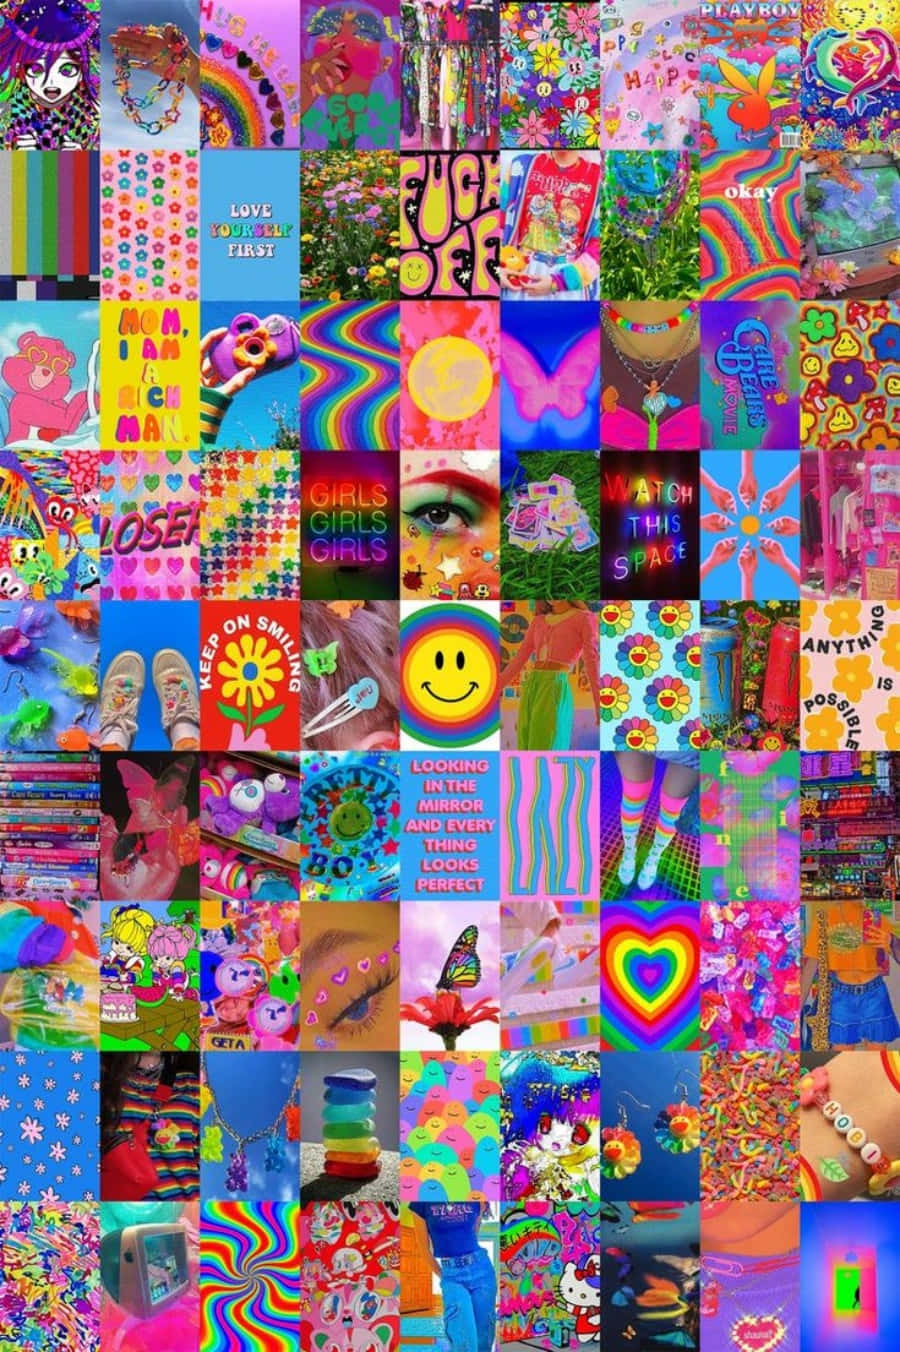 Download A Collage Of Colorful Pictures And Designs | Wallpapers.com